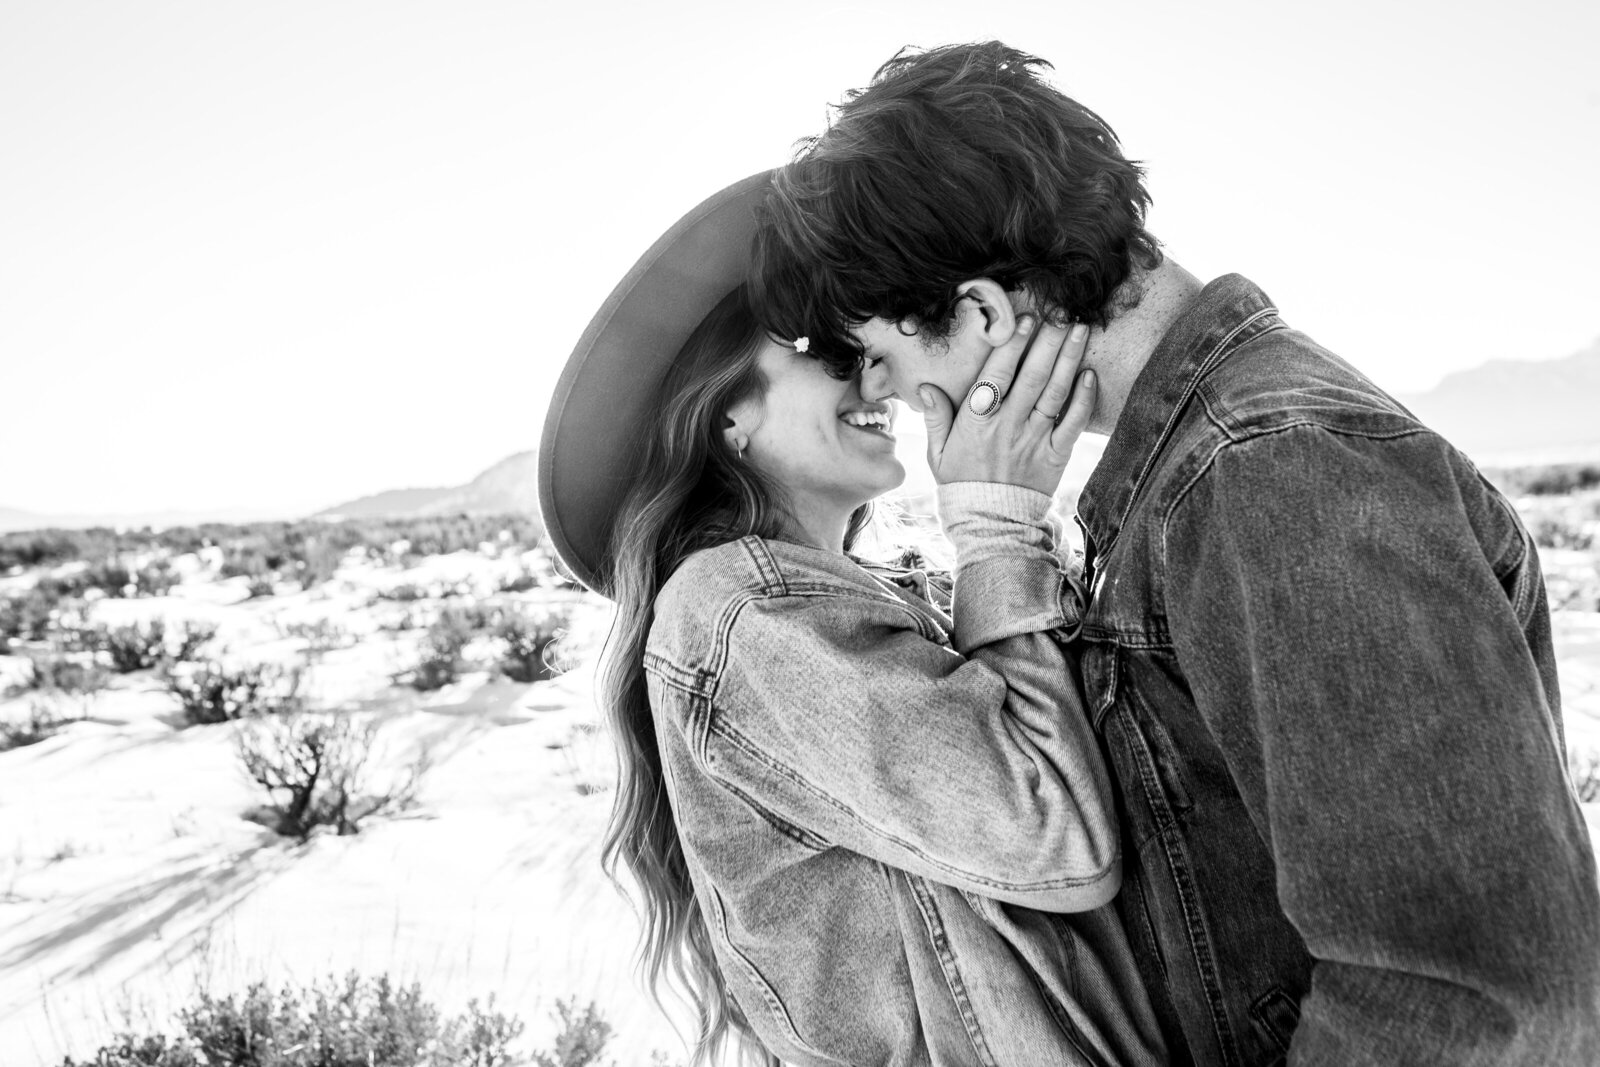 black and white image of engaged couple about to kiss with the man leaning into the woman as she holds his face and smile, they are both wearing denim and she is wearing a wide brimmed hat